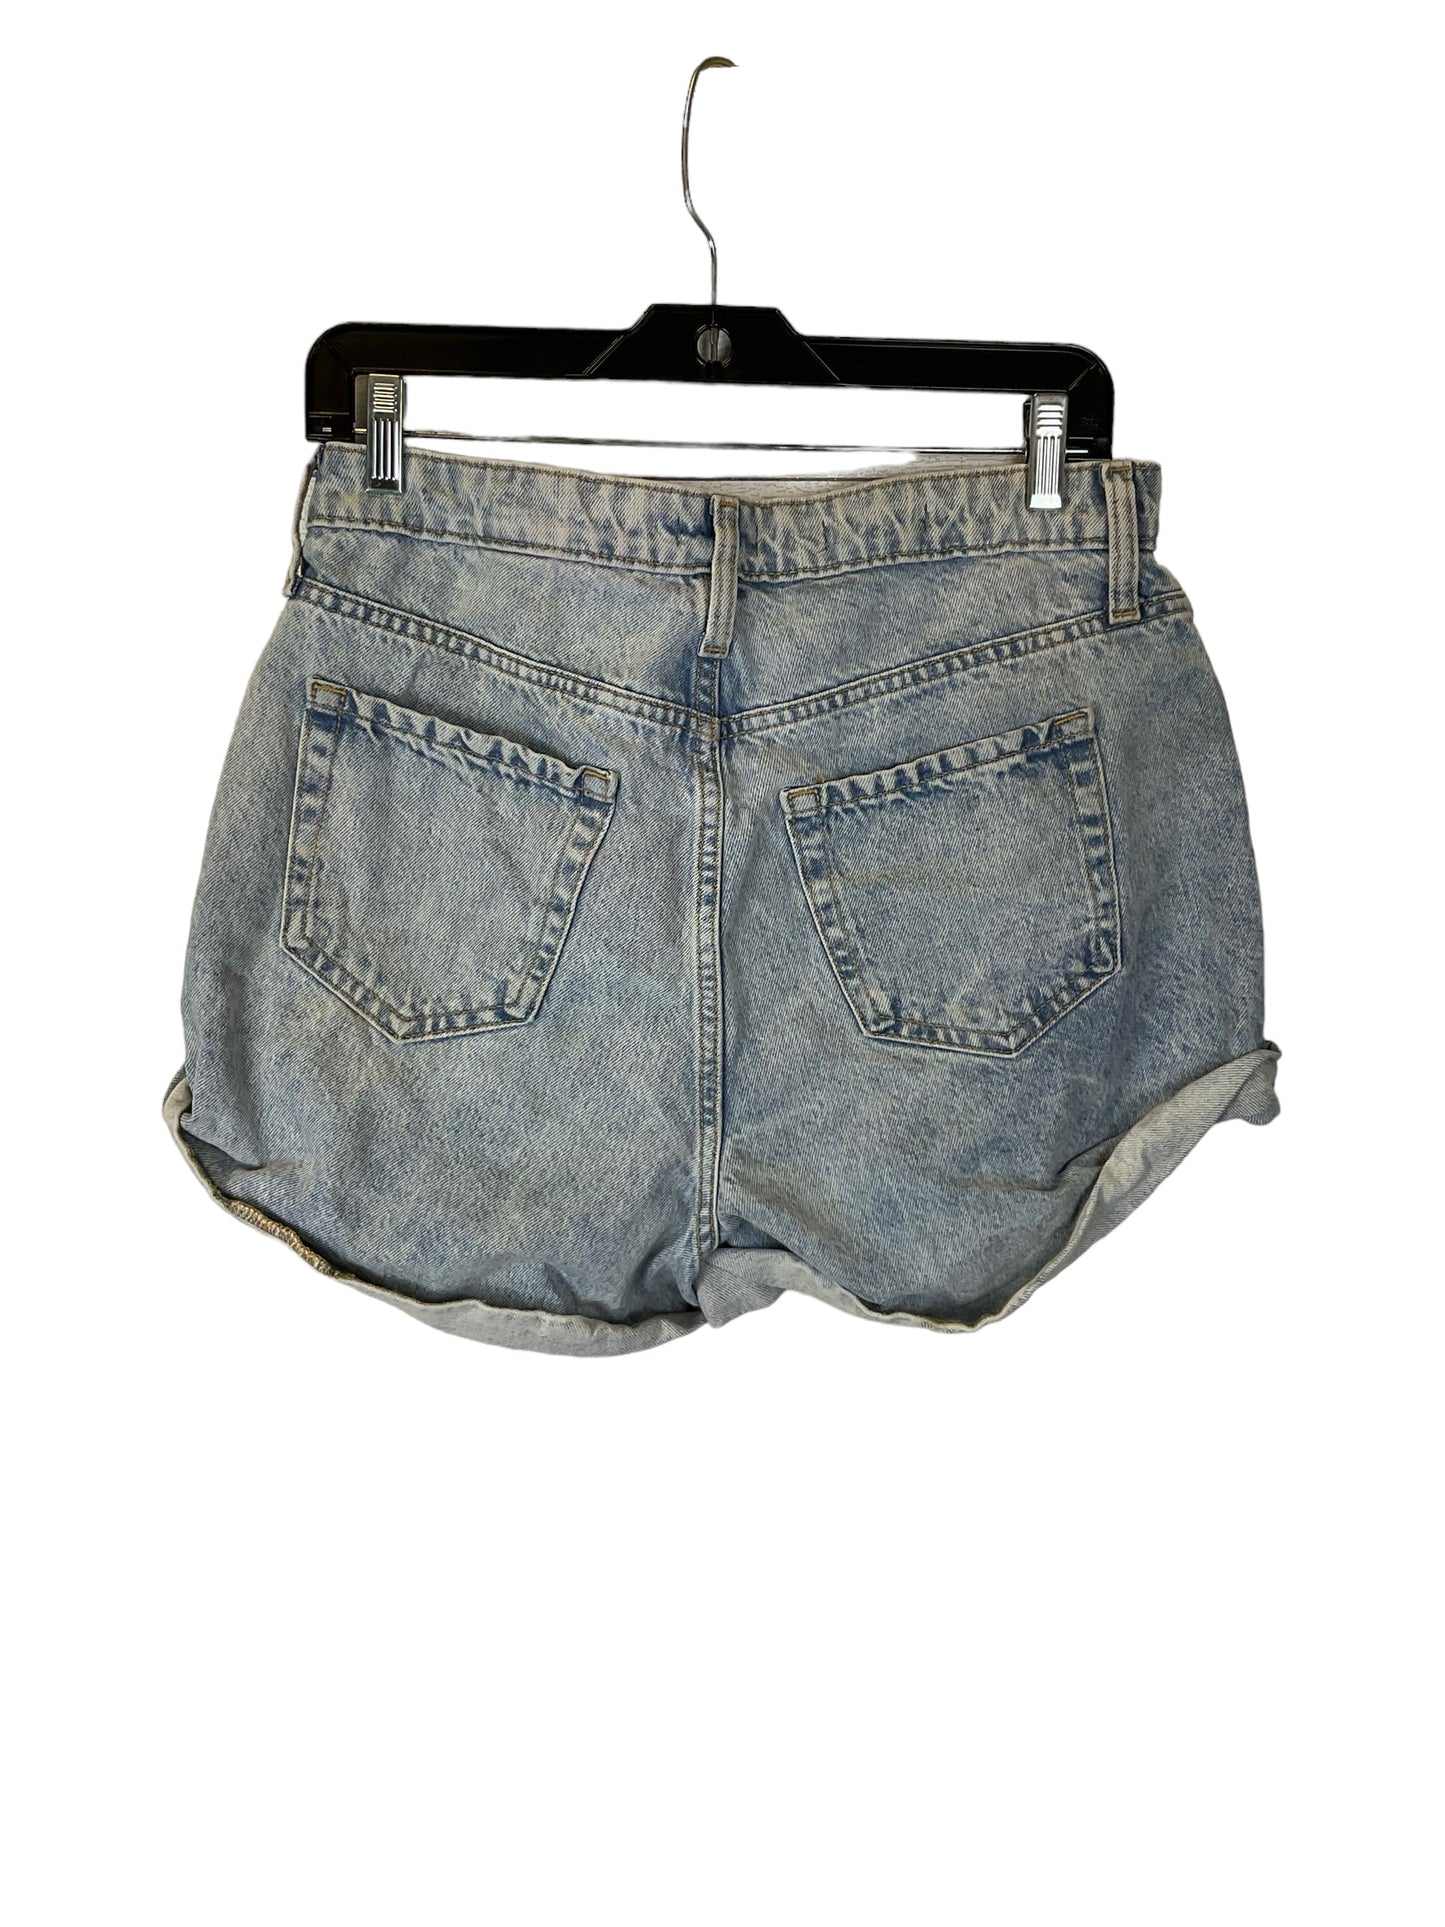 Shorts By Wild Fable  Size: 8